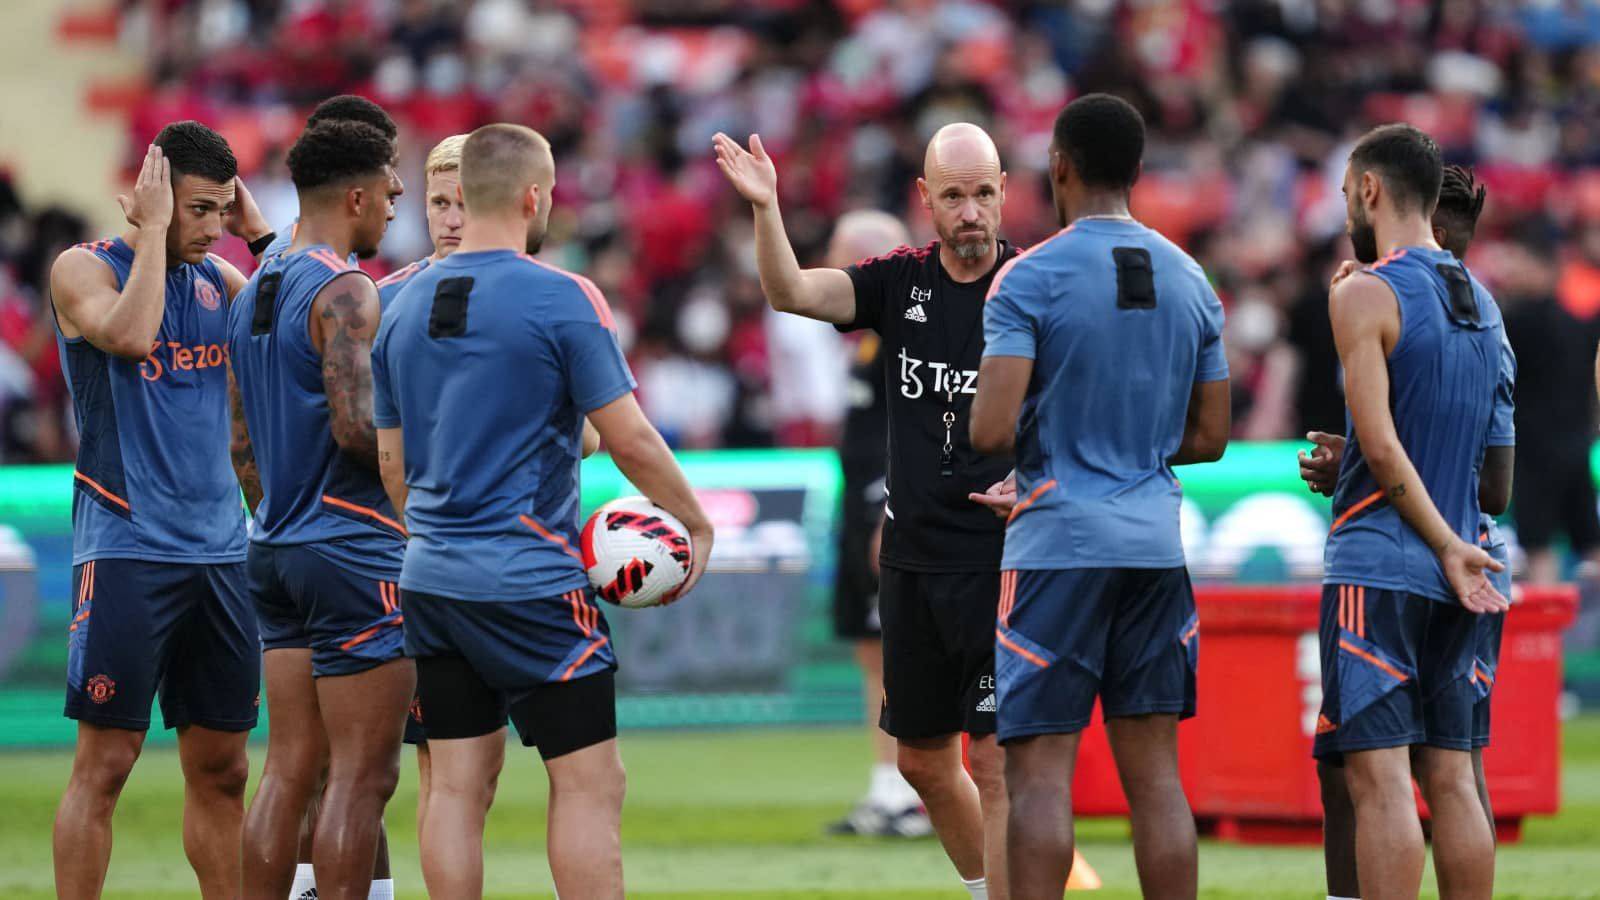 Ten Hag: Some Players Lack Mental Strength, Unable to Play Through Pain